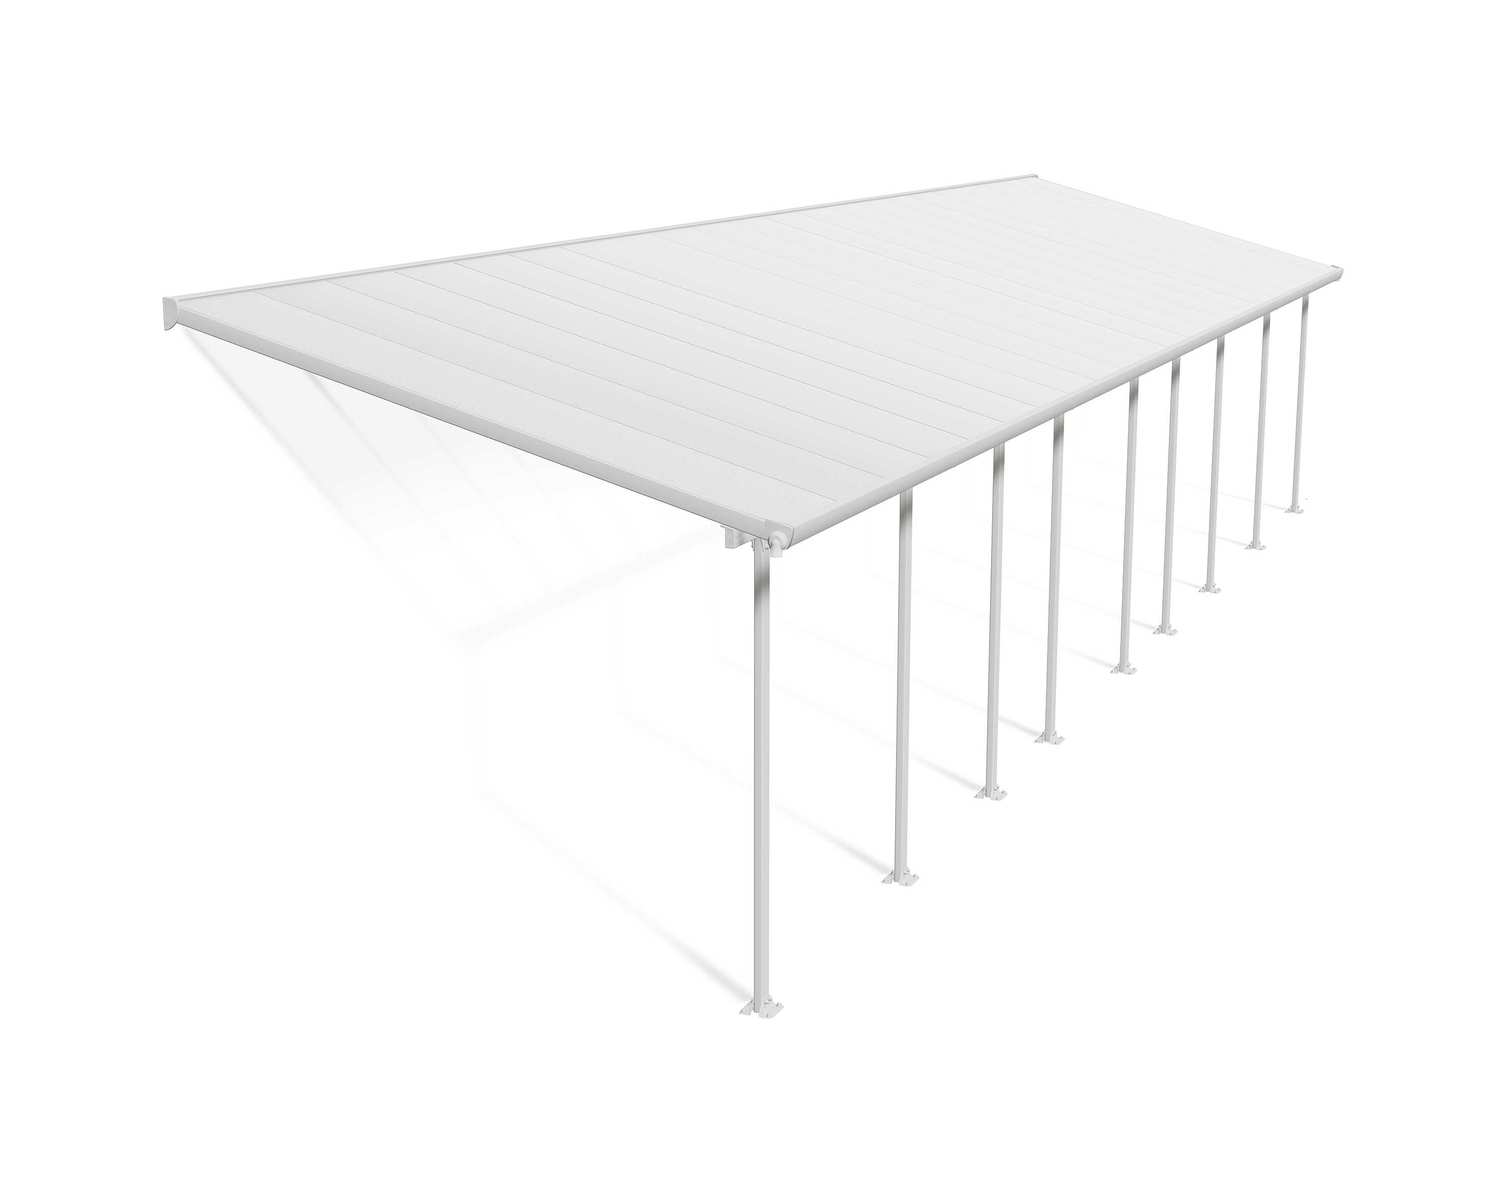 Patio Cover Kit Feria 3 ft. x 13.40 ft. White Structure & White Multi Wall Glazing